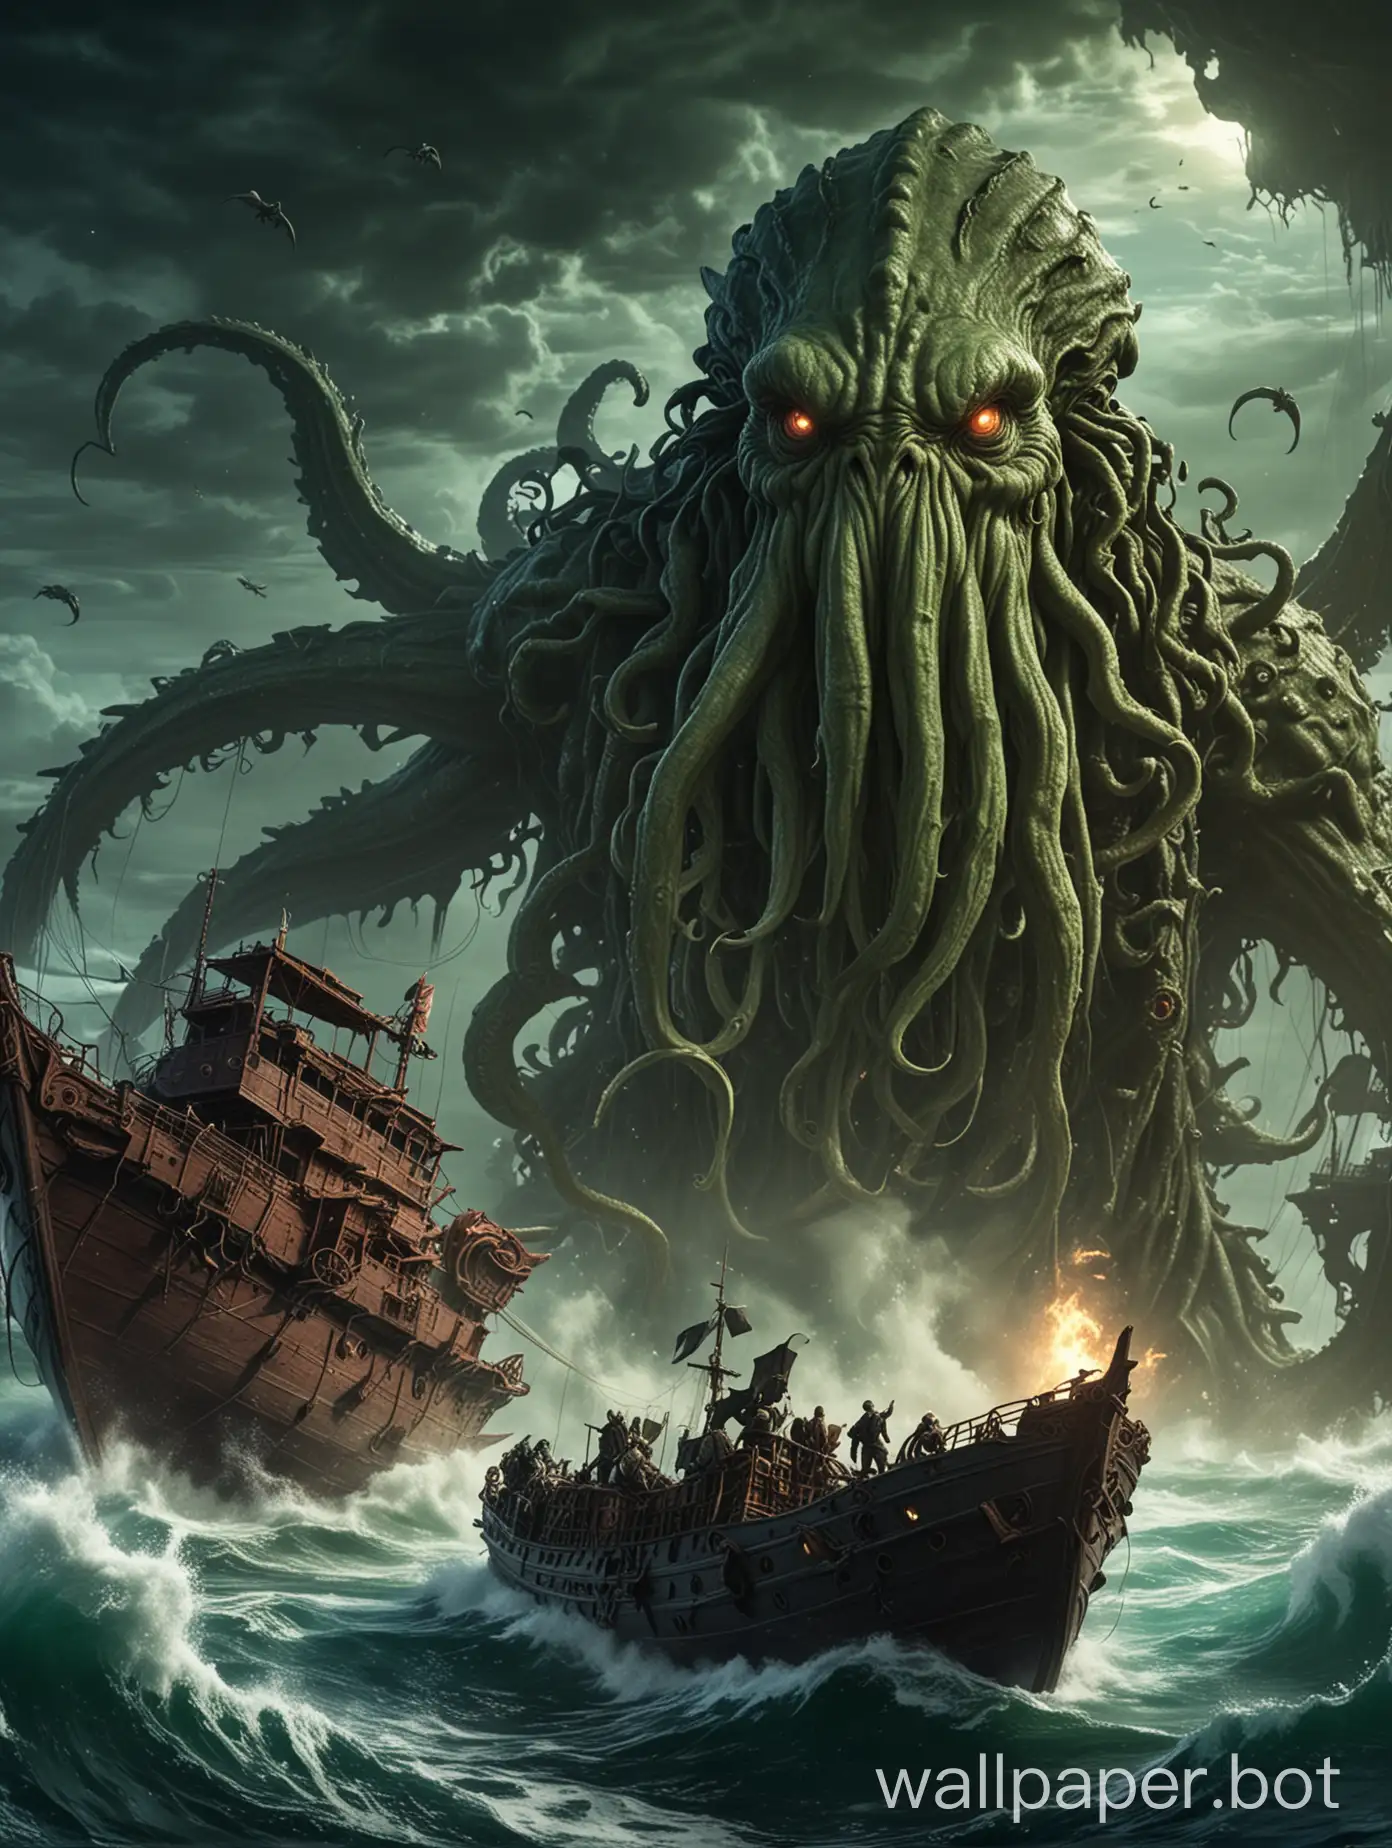 Cthulhu-Monsters-Destroying-Ship-Apocalyptic-Sea-Temple-Scene